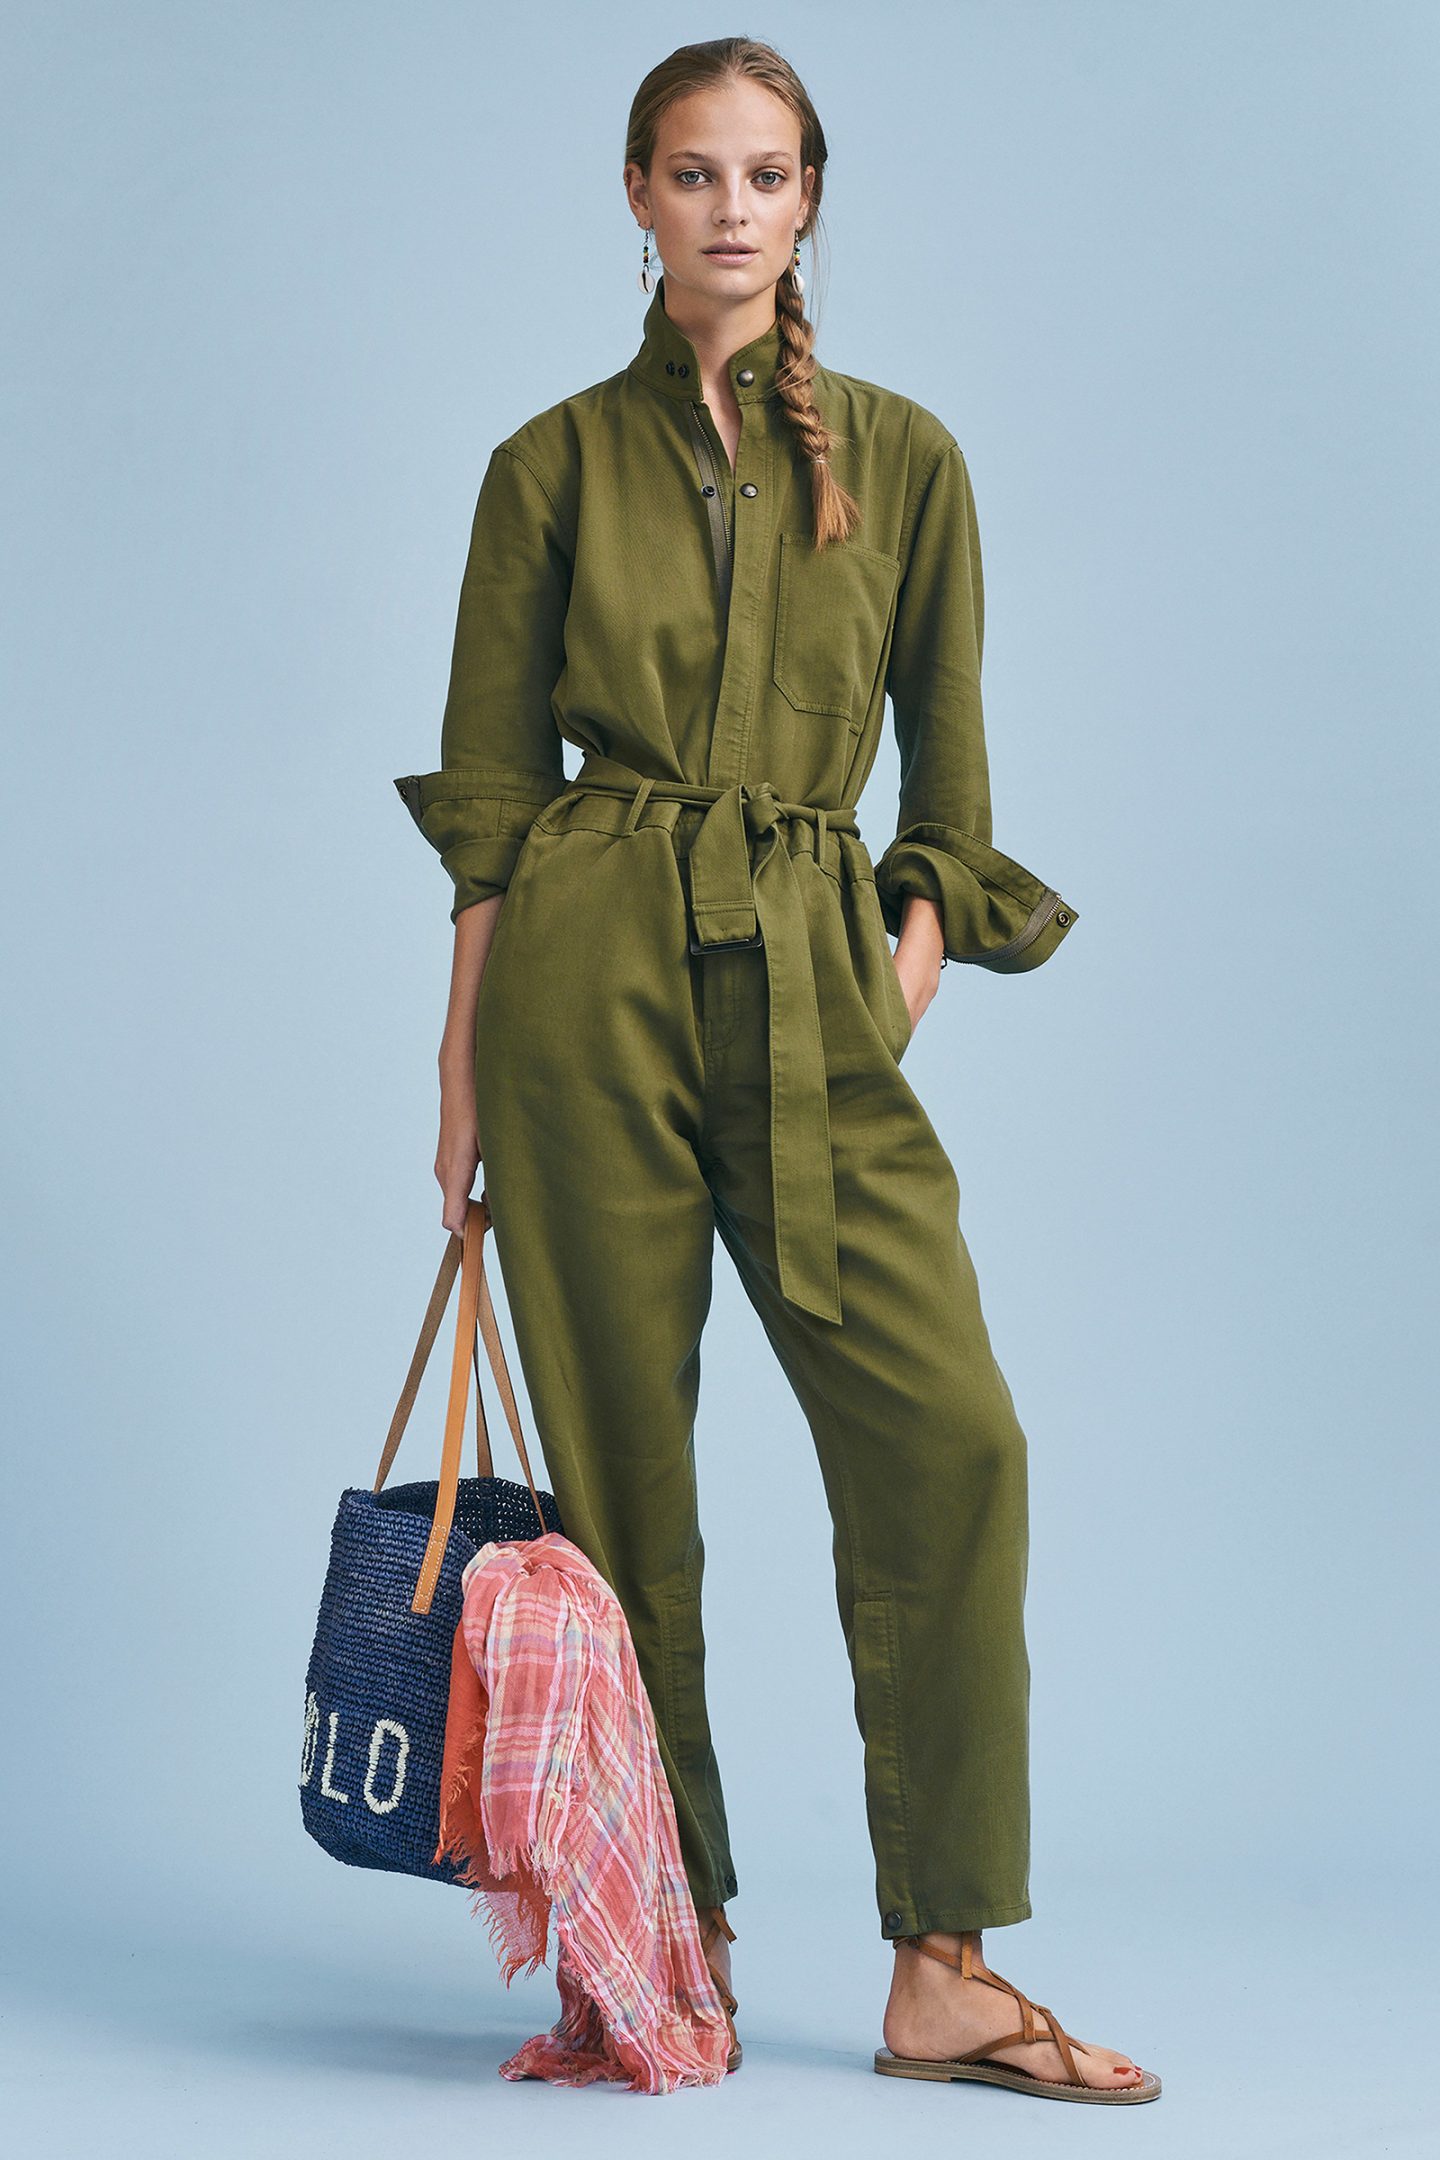 Polo Ralph Lauren Spring 2019 For Lookbook Friday – ALLIE NYC